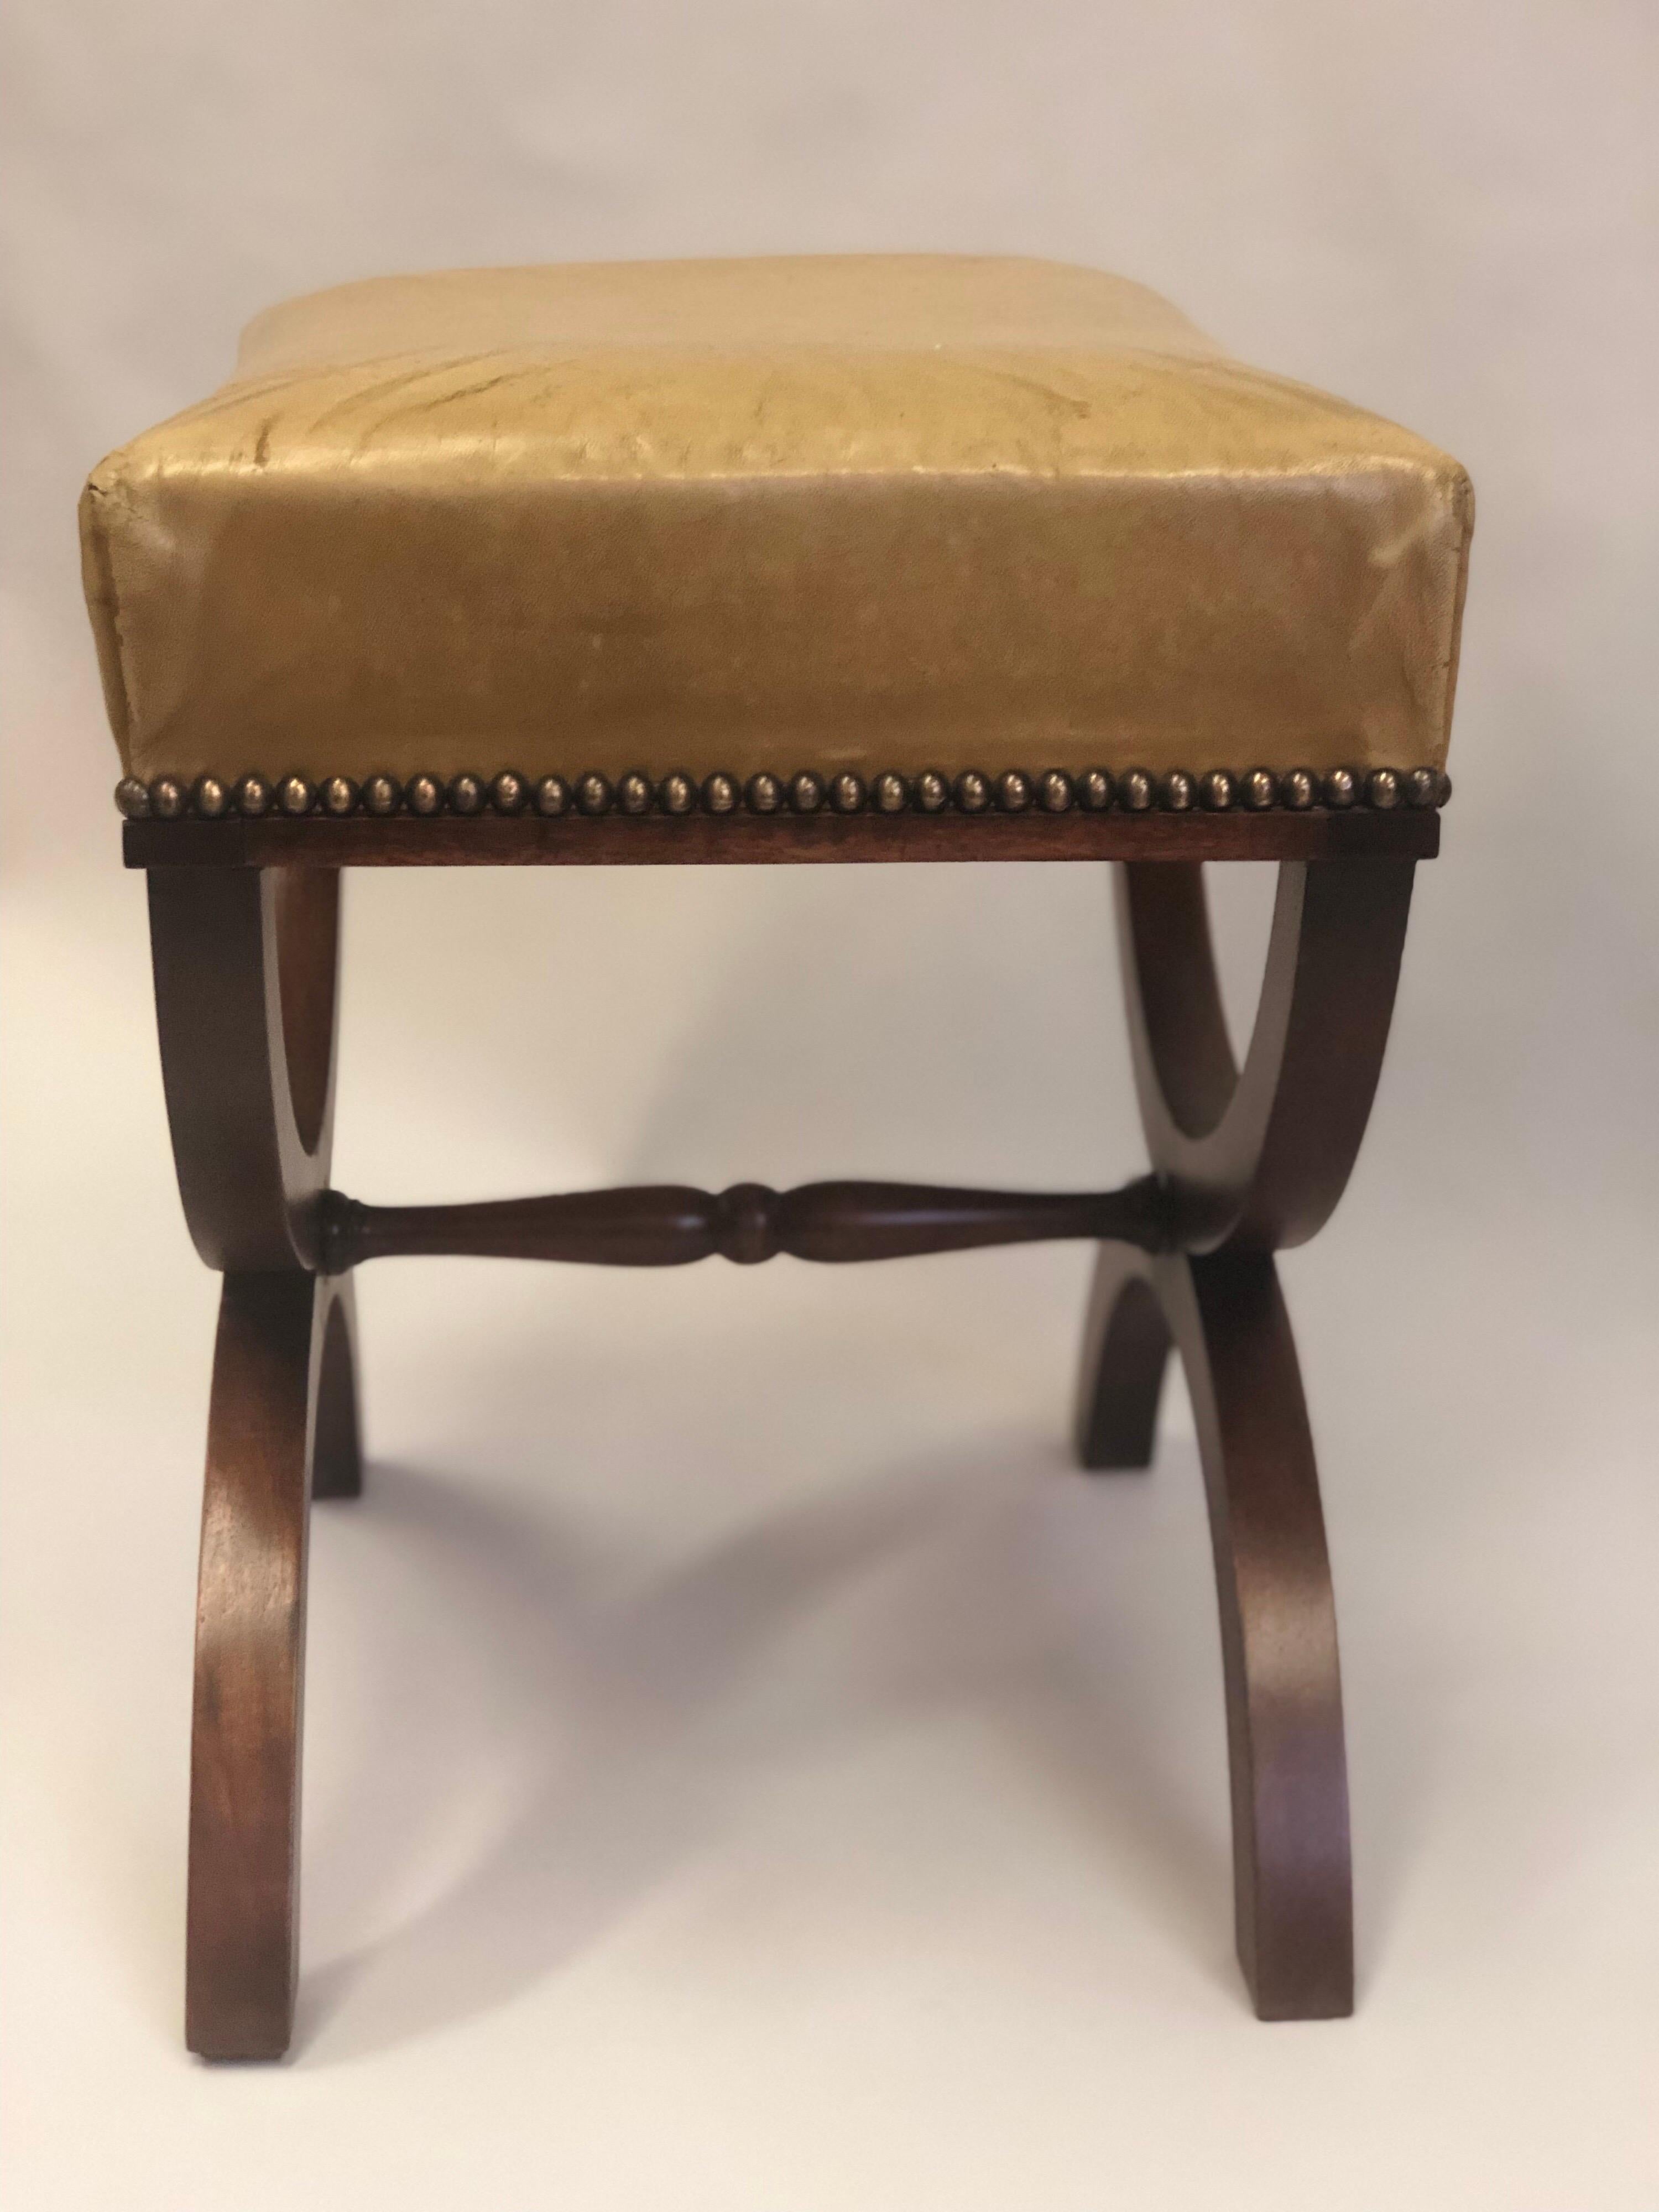 French Modern Neoclassical Mahogany & Leather Benches/ Stools, Andre Arbus, Pair For Sale 4